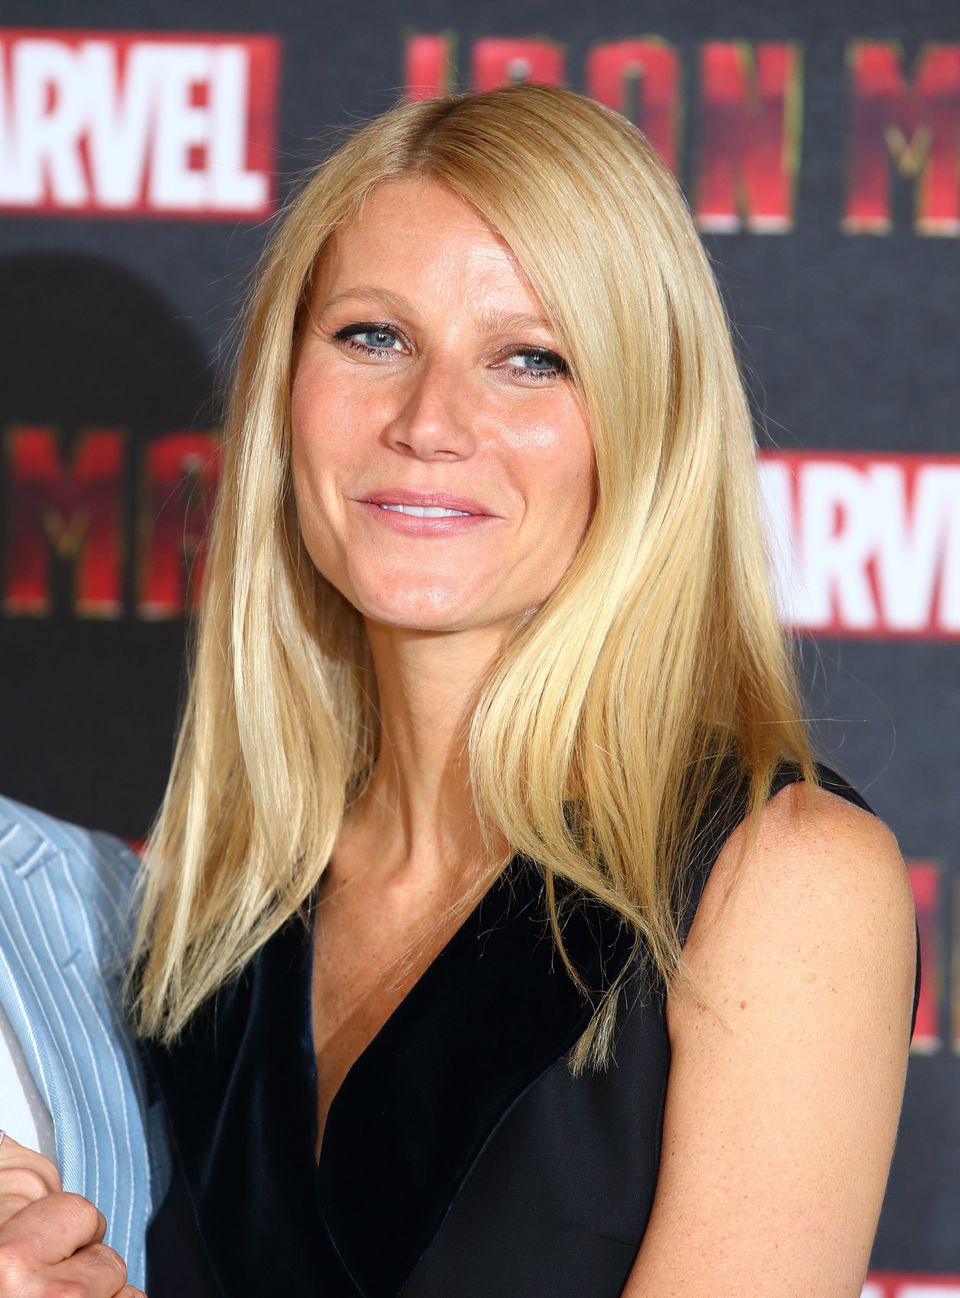 The Most Hated Celebrity In Hollywood Is Paltrow (Slow Clap